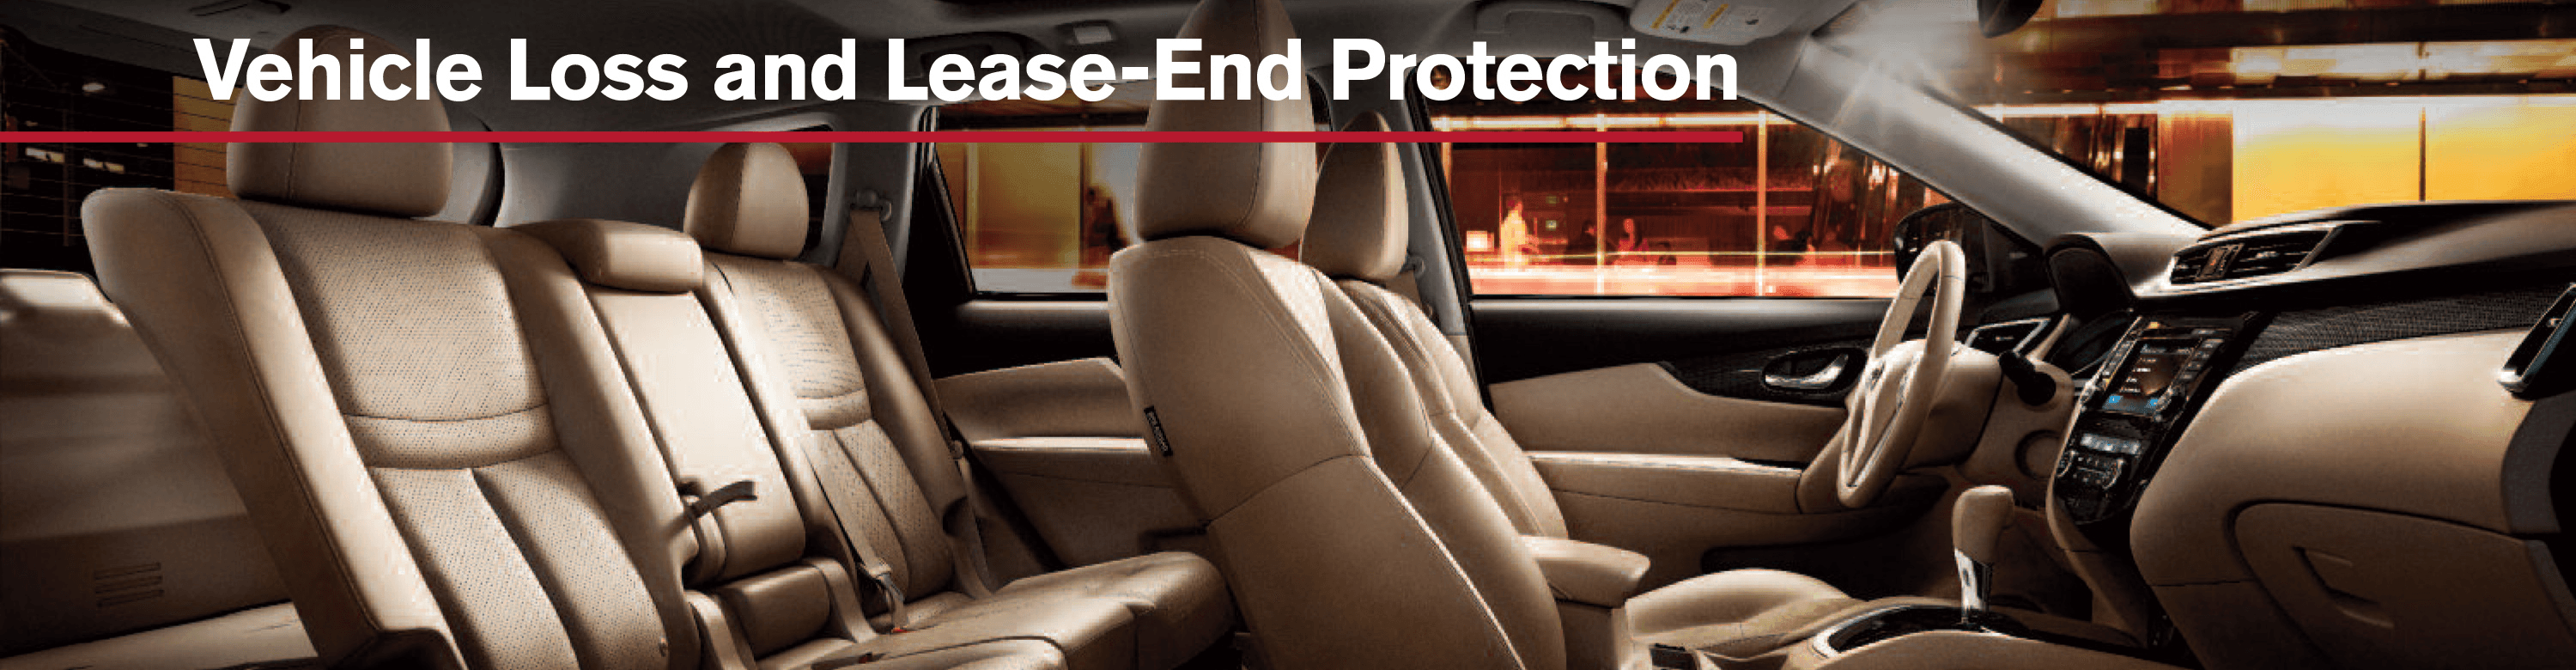 Vehicle loss and lease-end protection